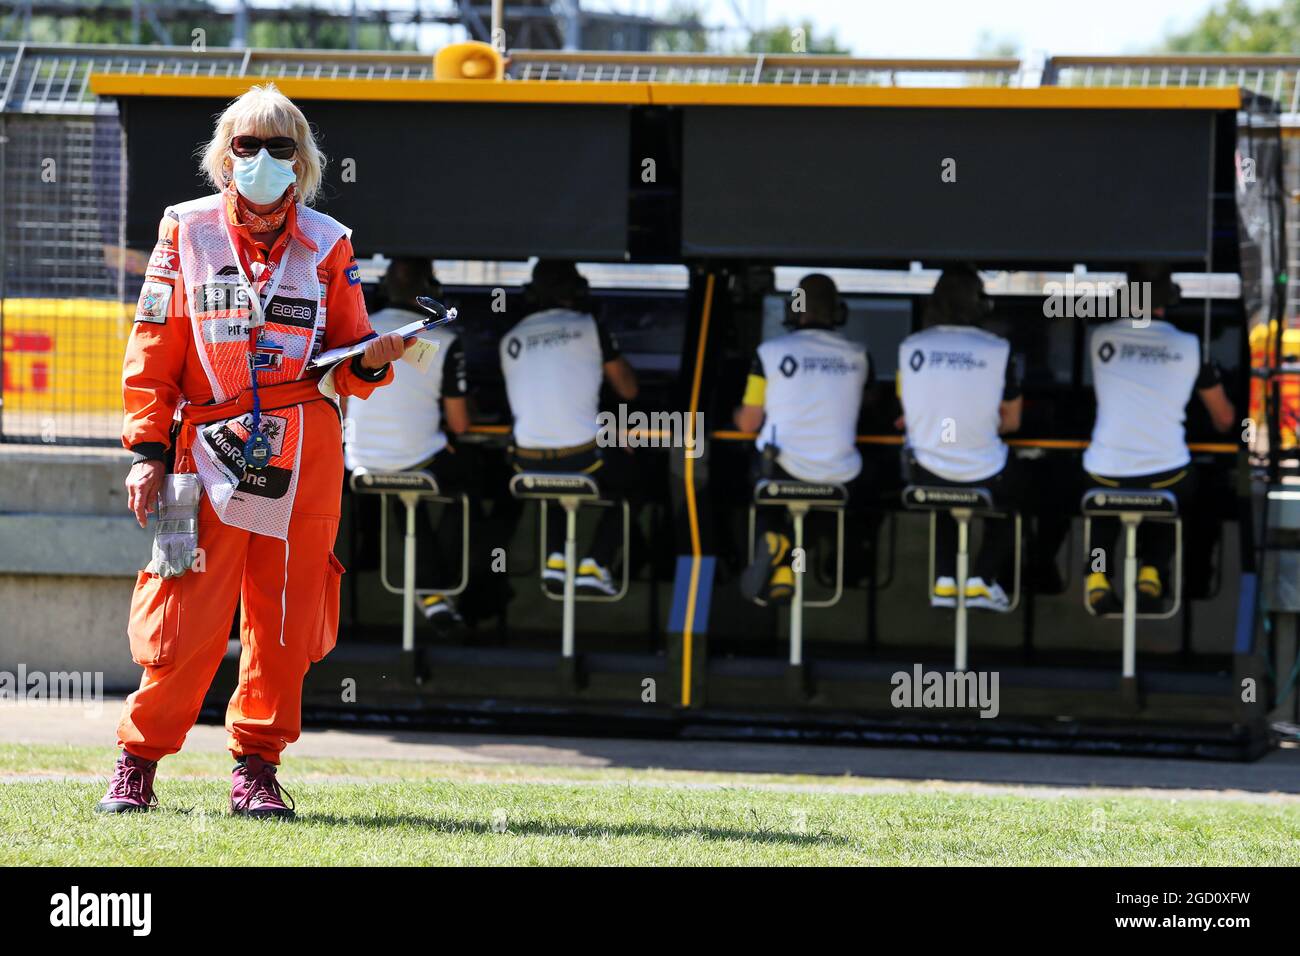 Circuit atmosphere - marshal in the pits. British Grand Prix, Friday 31st July 2020. Silverstone, England. Stock Photo